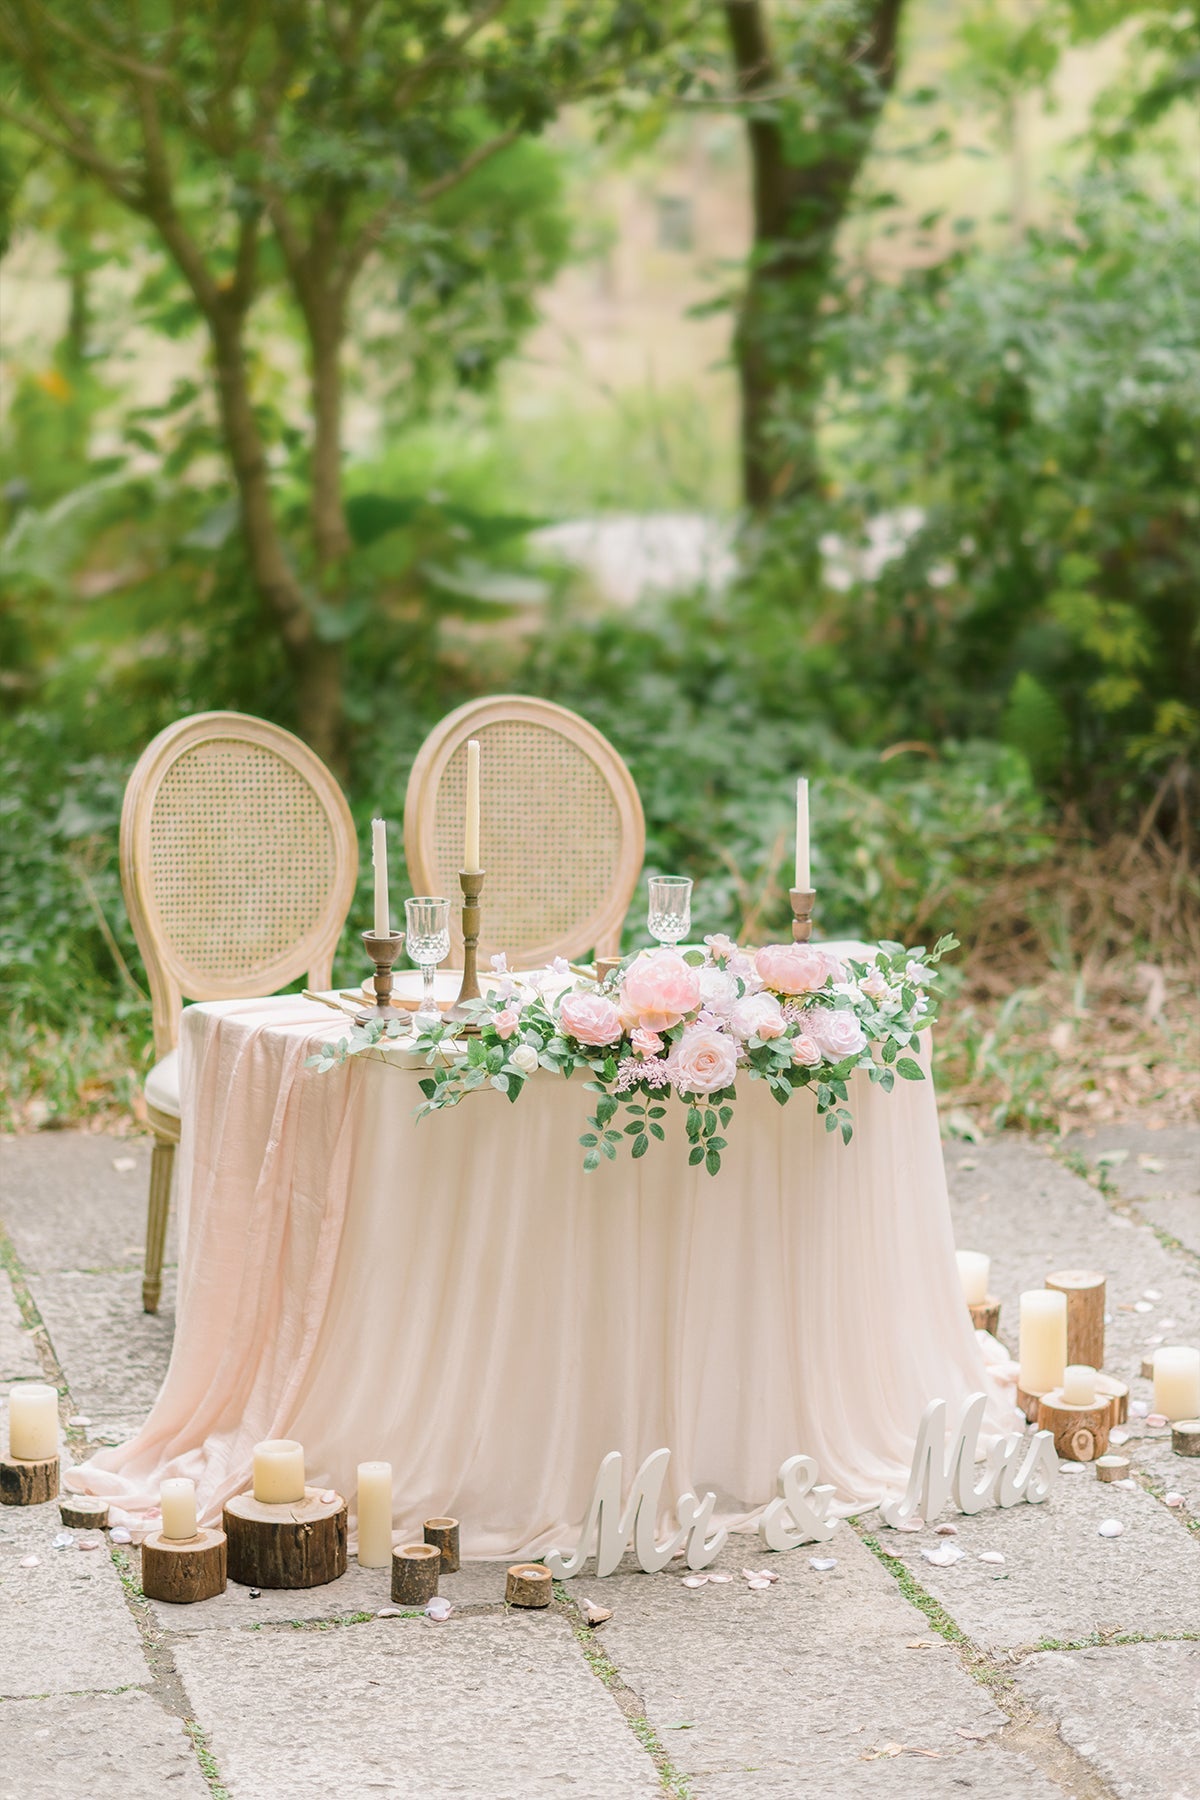 Flash Sale | Head Table Floral Swags in Blush & Cream